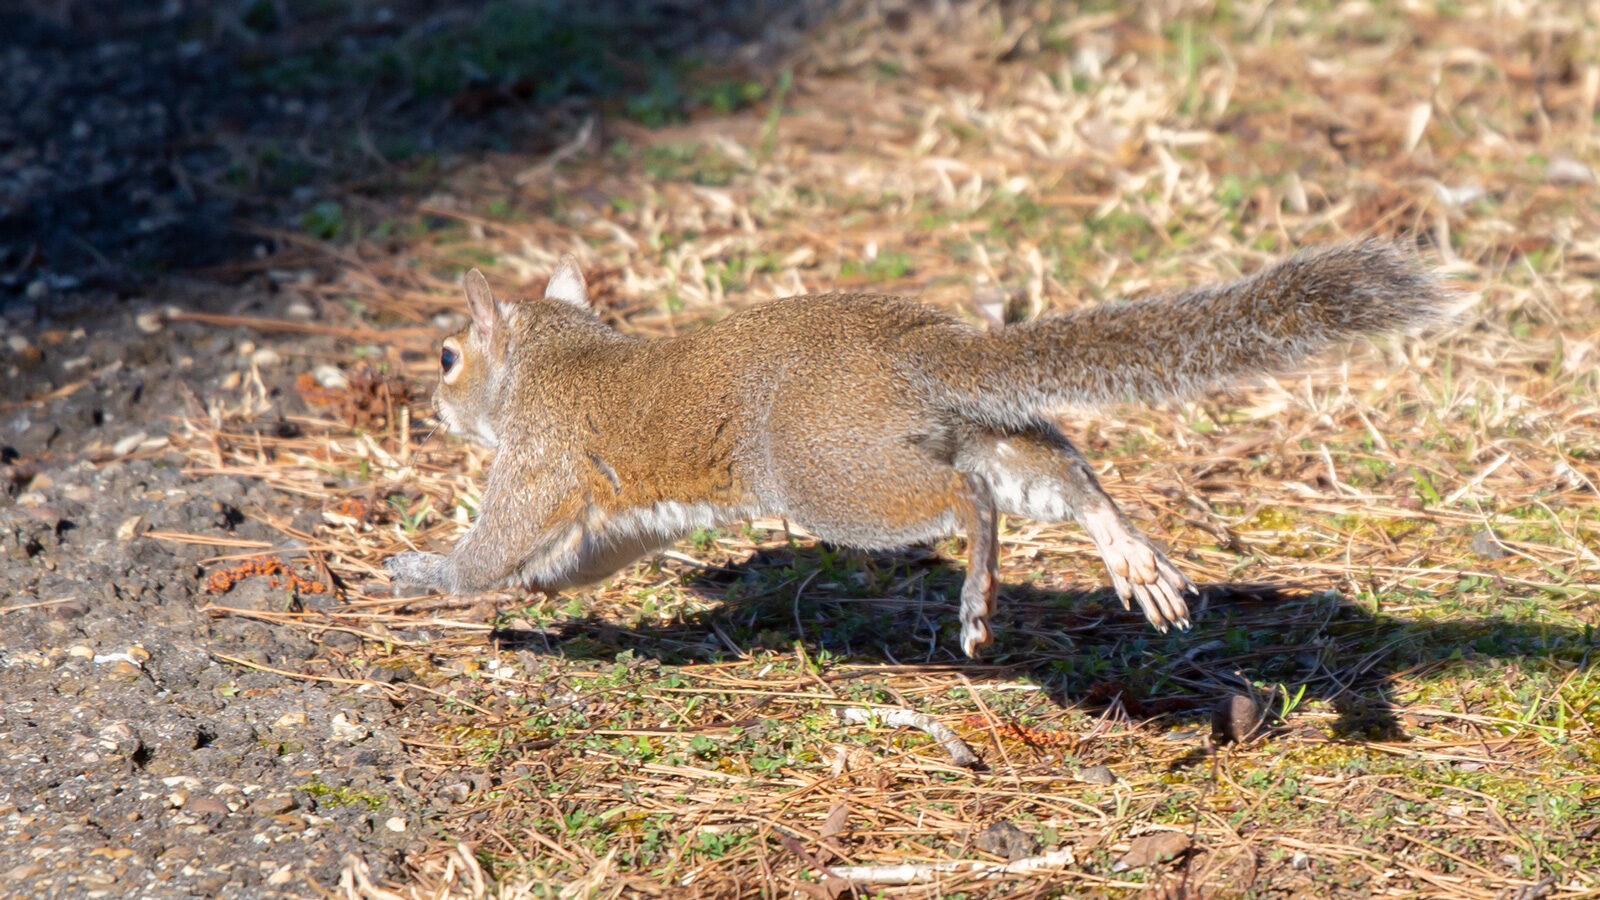 Eastern gray squirrel leaping